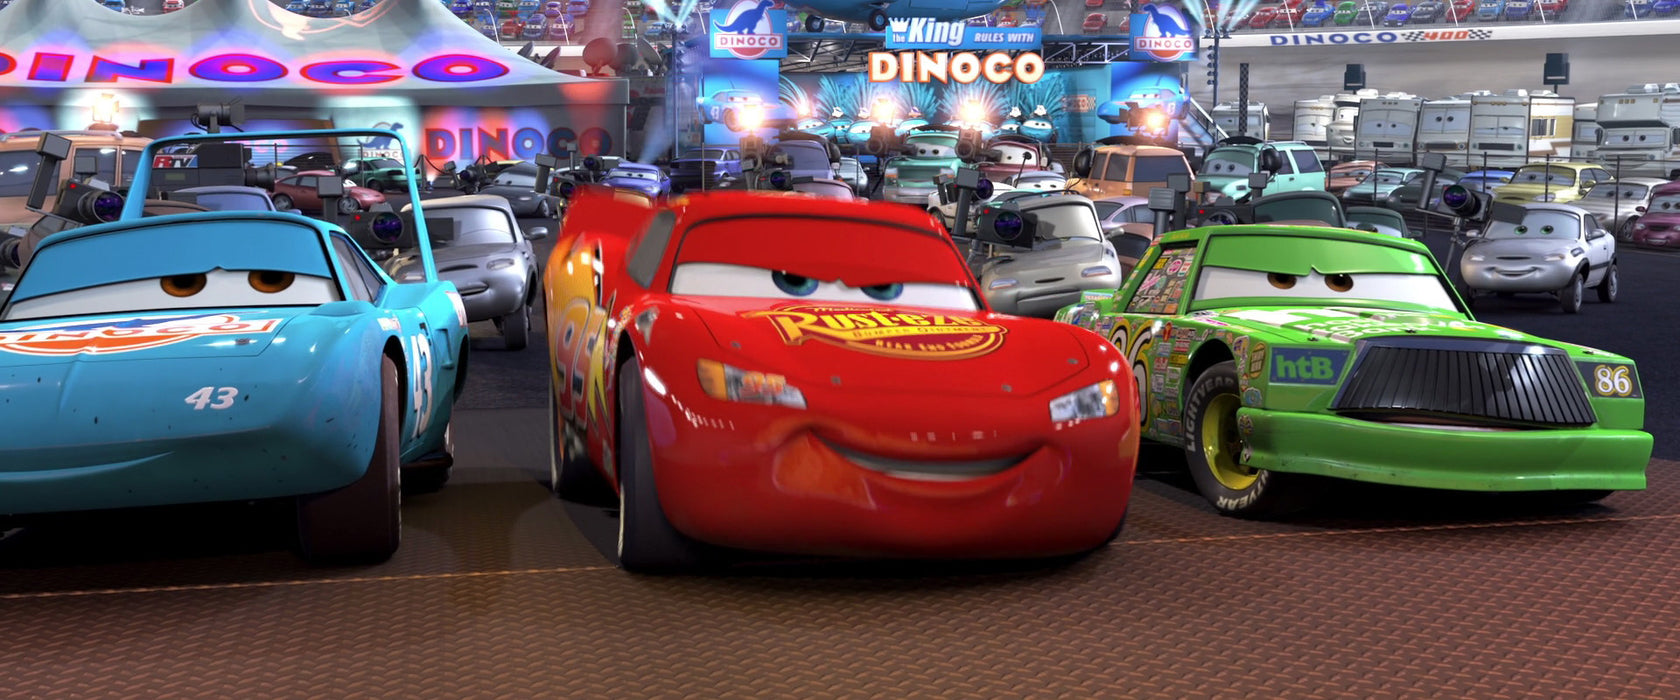 Disney's Cars / Cars 2 / Cars 3 [Blu-Ray 3-Movie Collection]